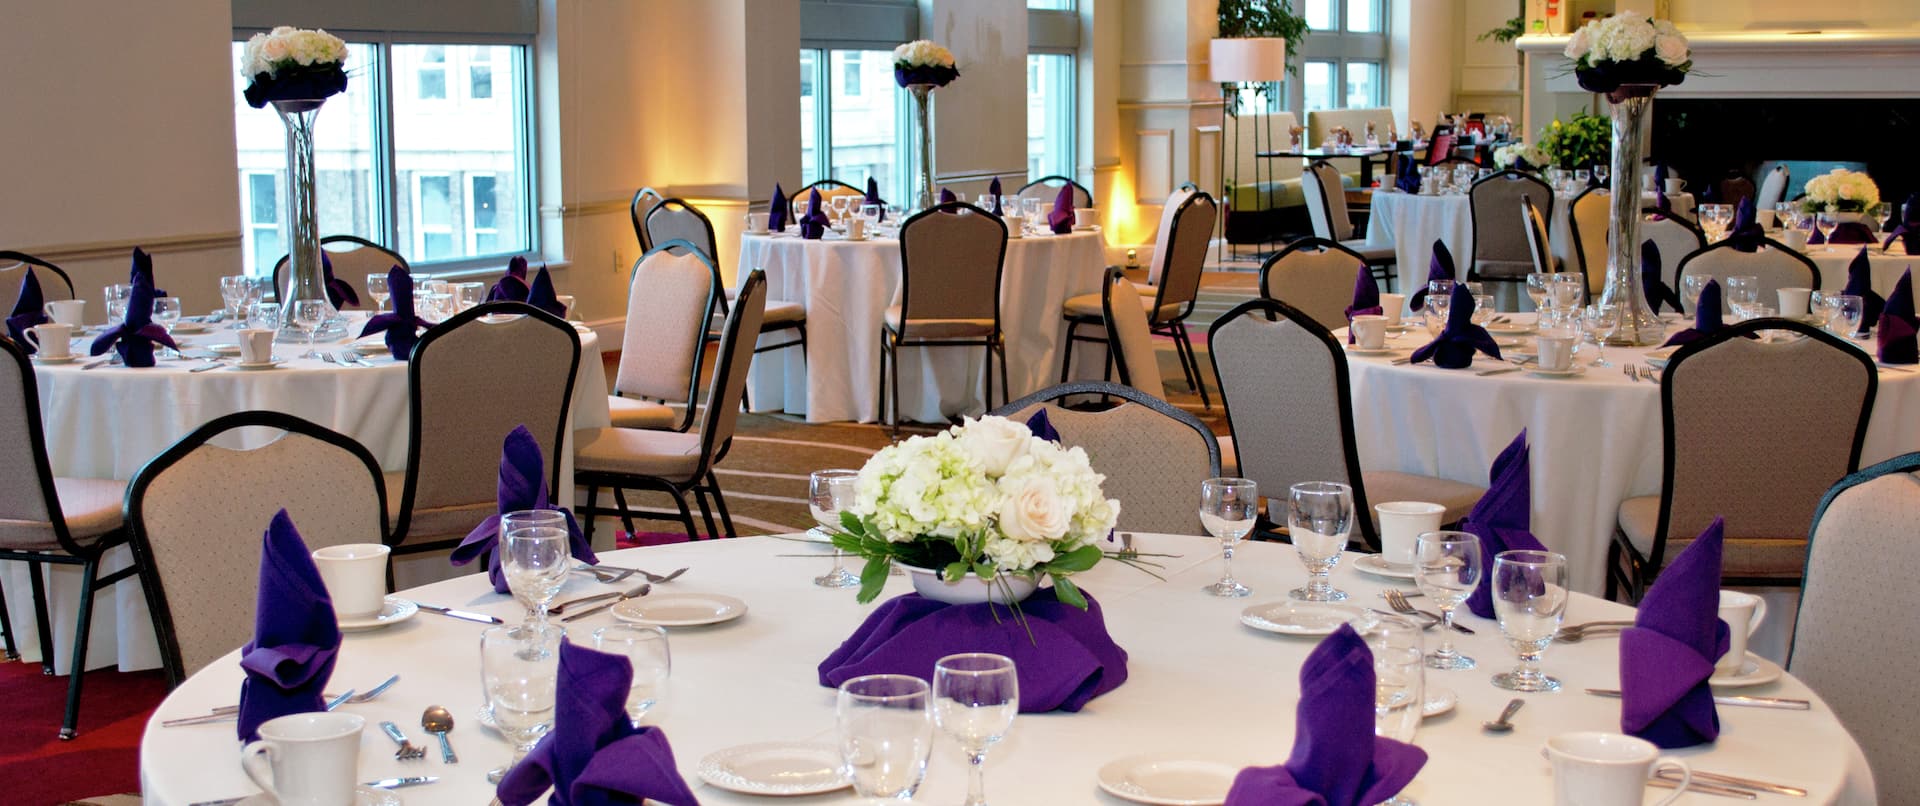 Fireplace in Meeting Room With Flowers, Place Settings, and White Linens on Round Tables Set Up For Daytime Banquet